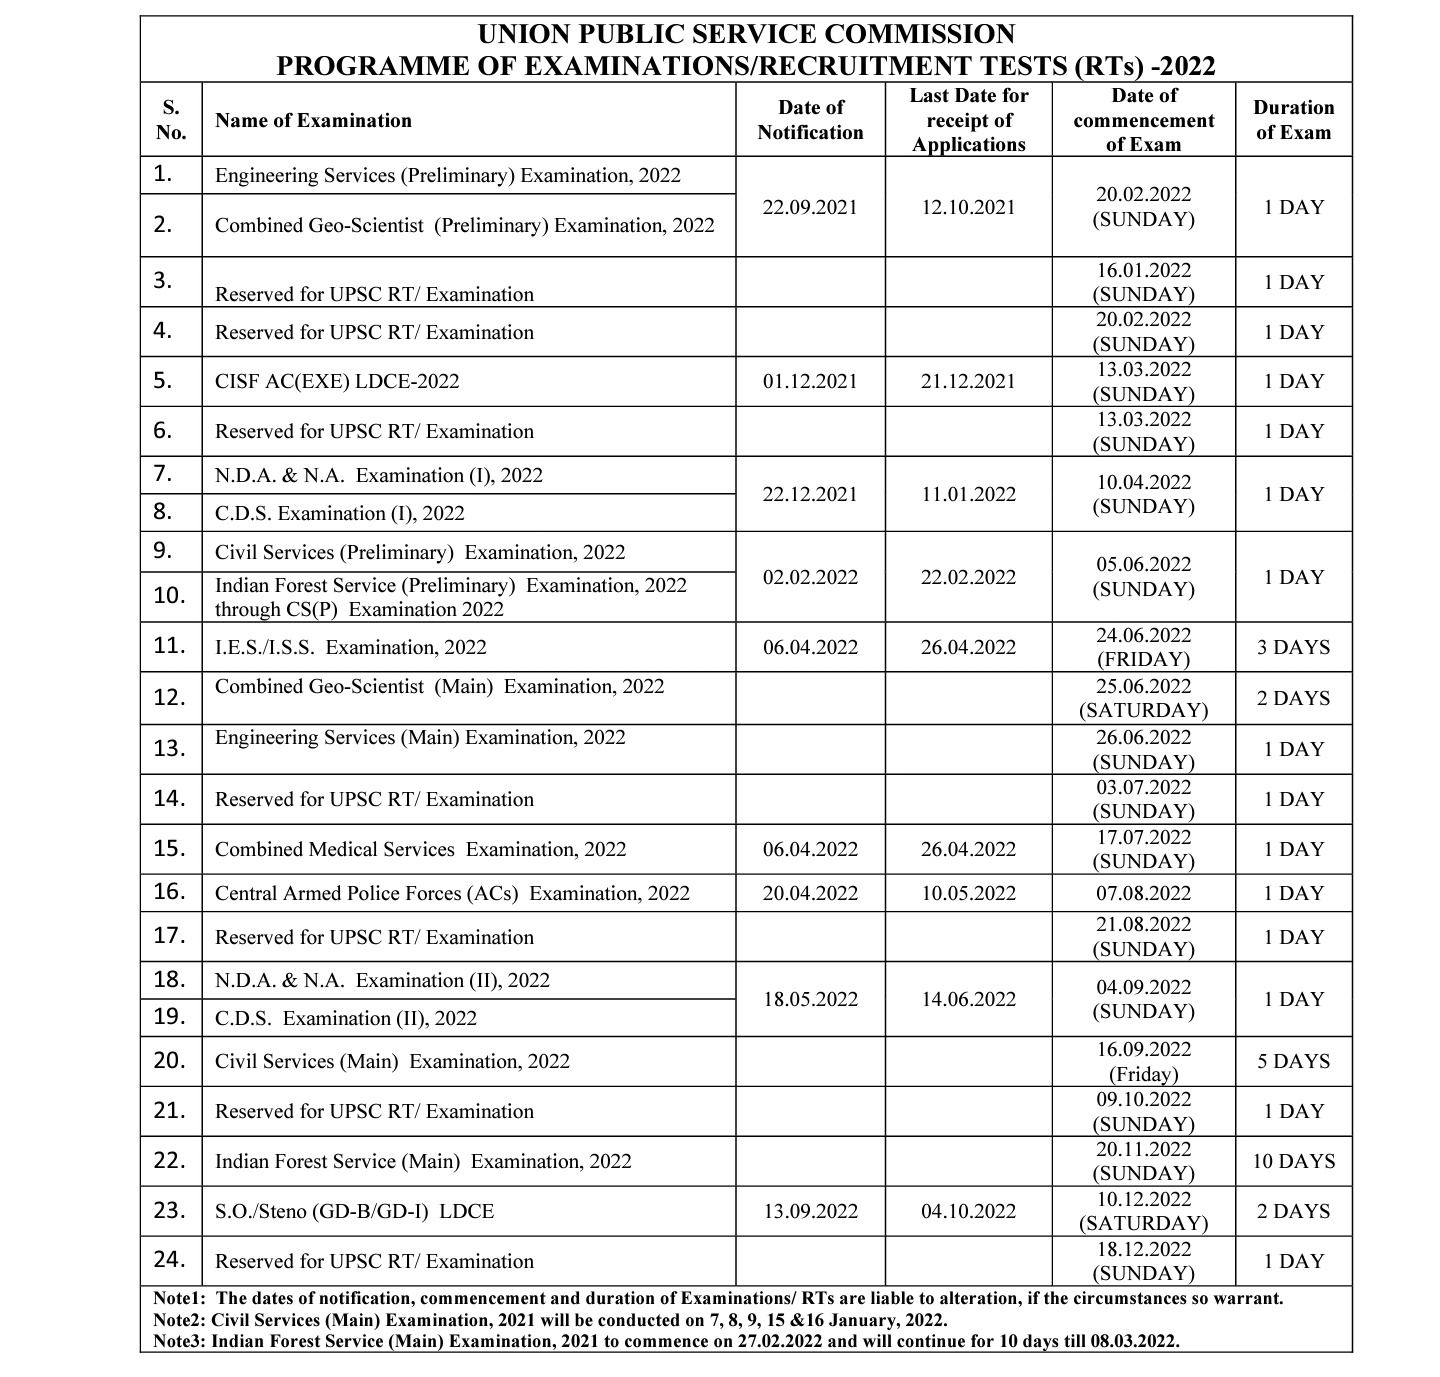 UPSC 2022 Calender for All exams